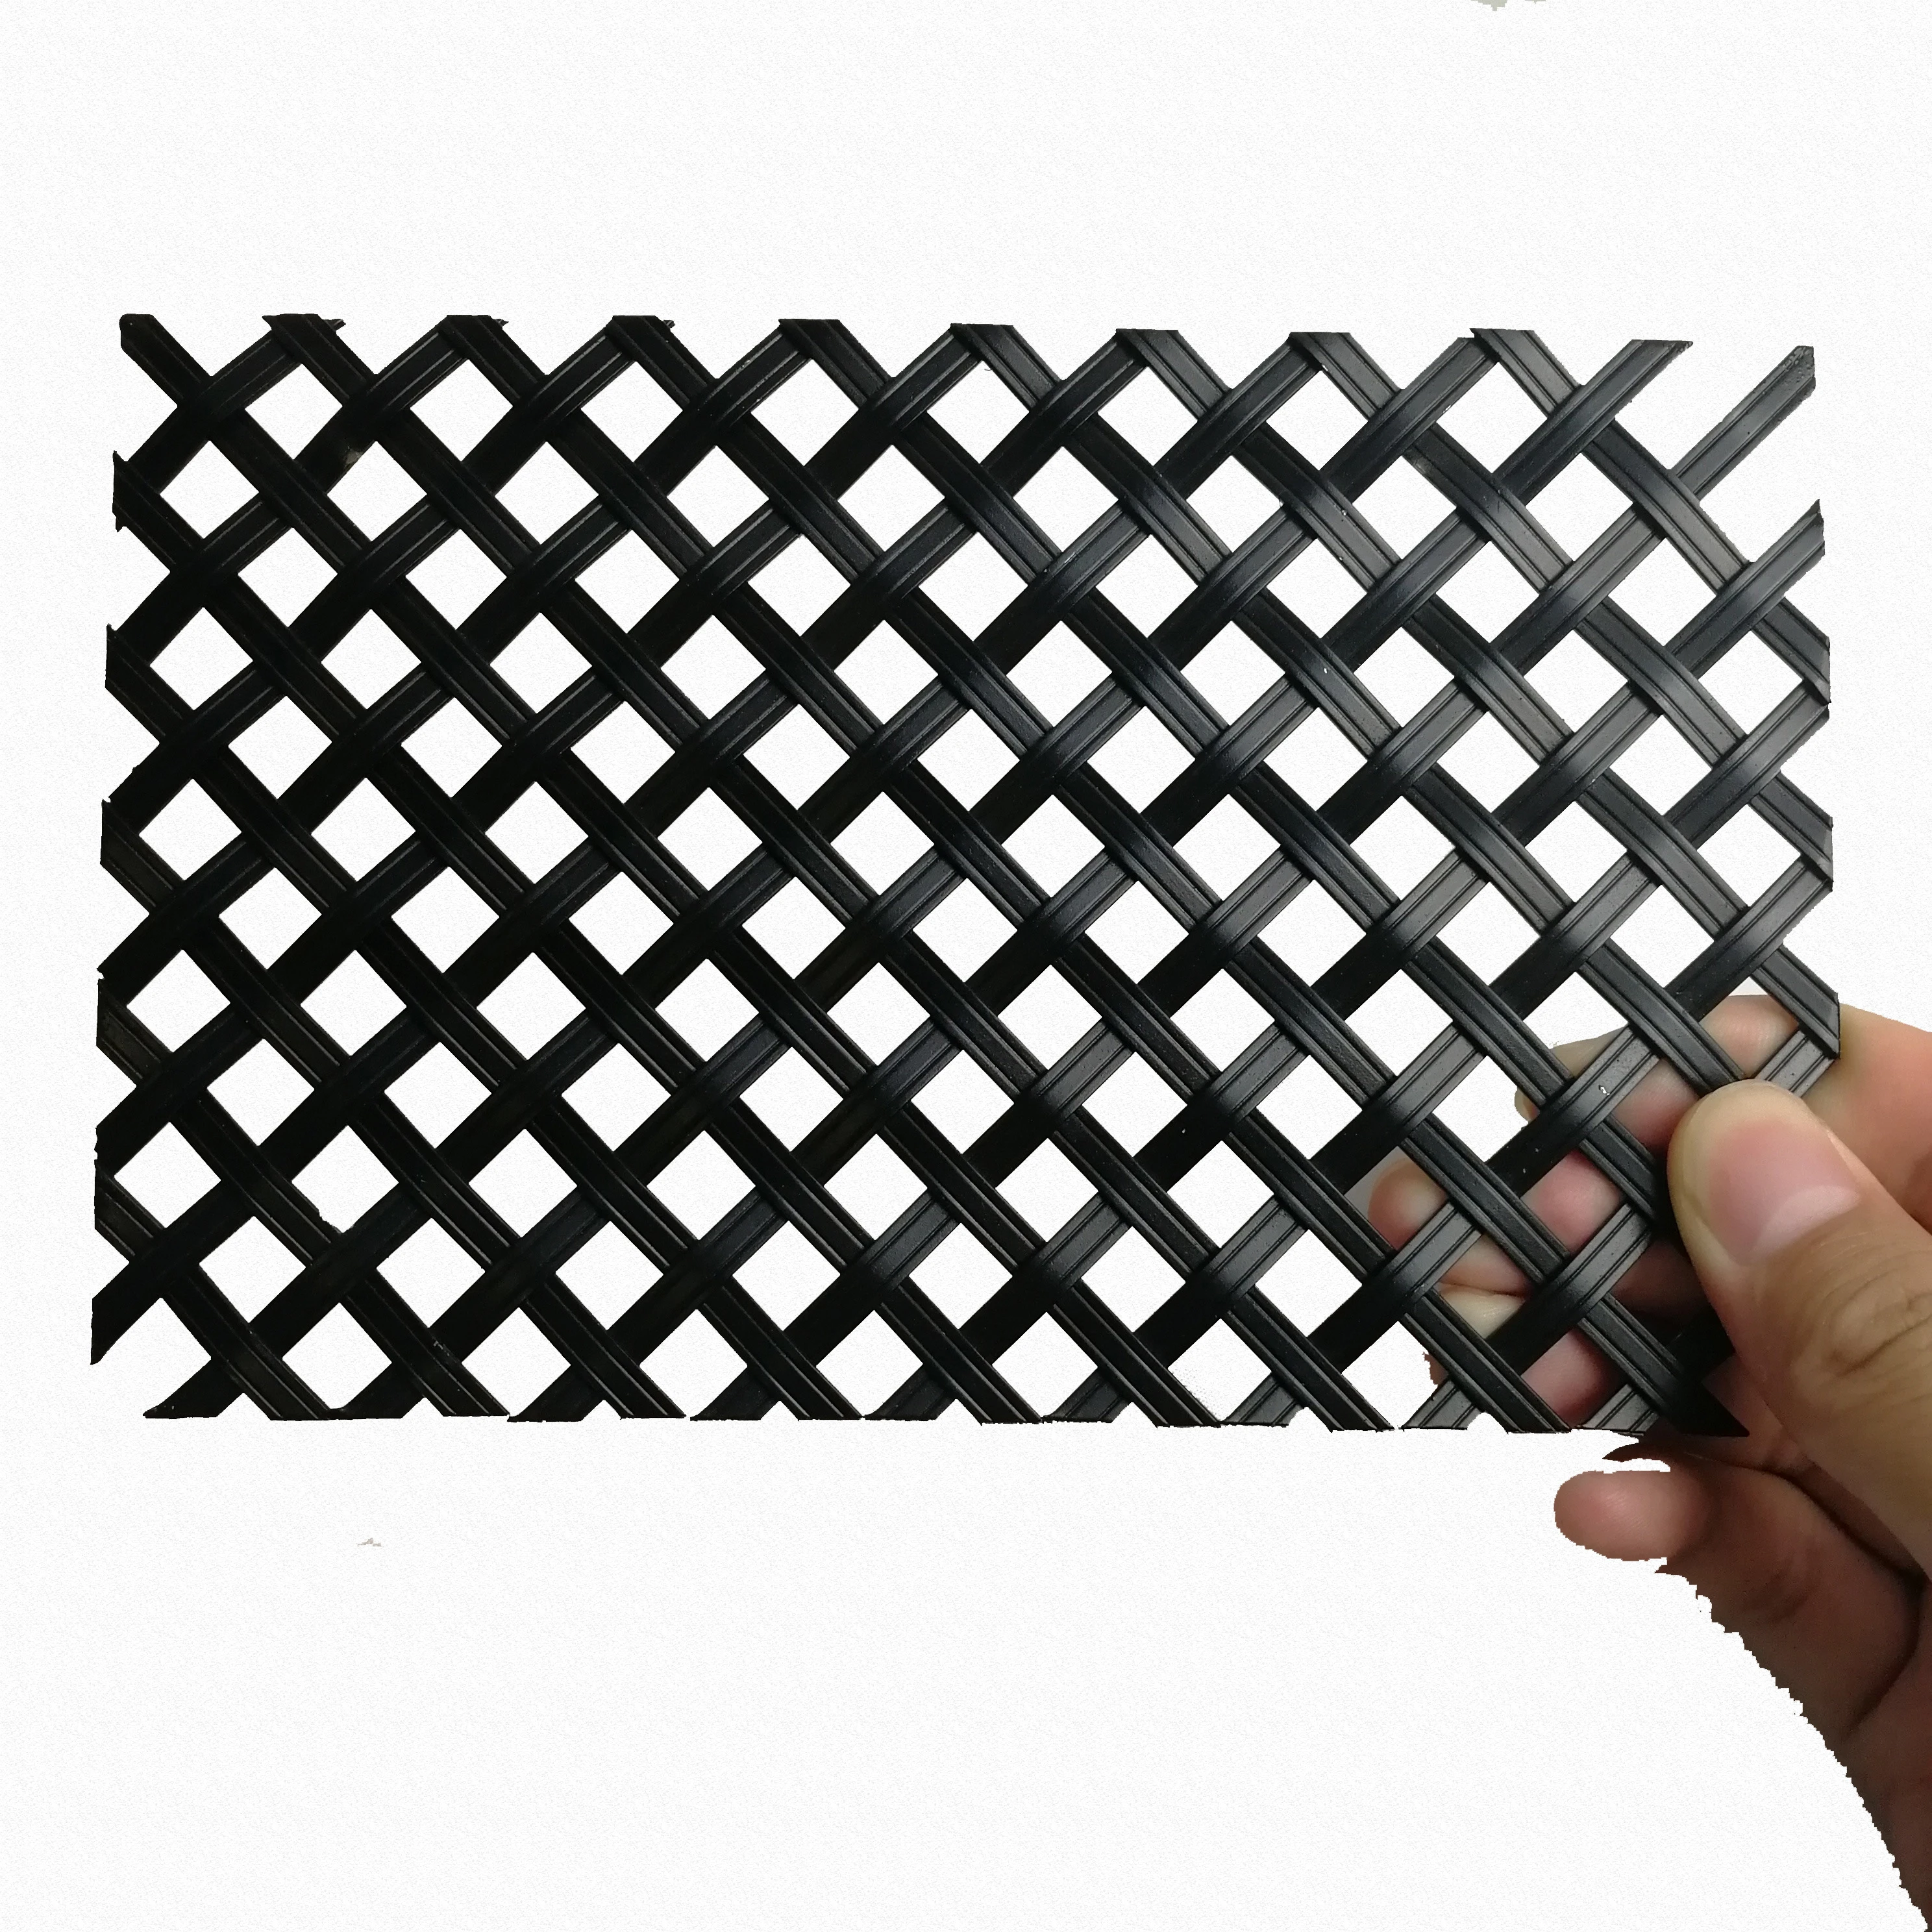 XY-1275B Shuolong decorative stainless steel wire mesh for cabinet doors